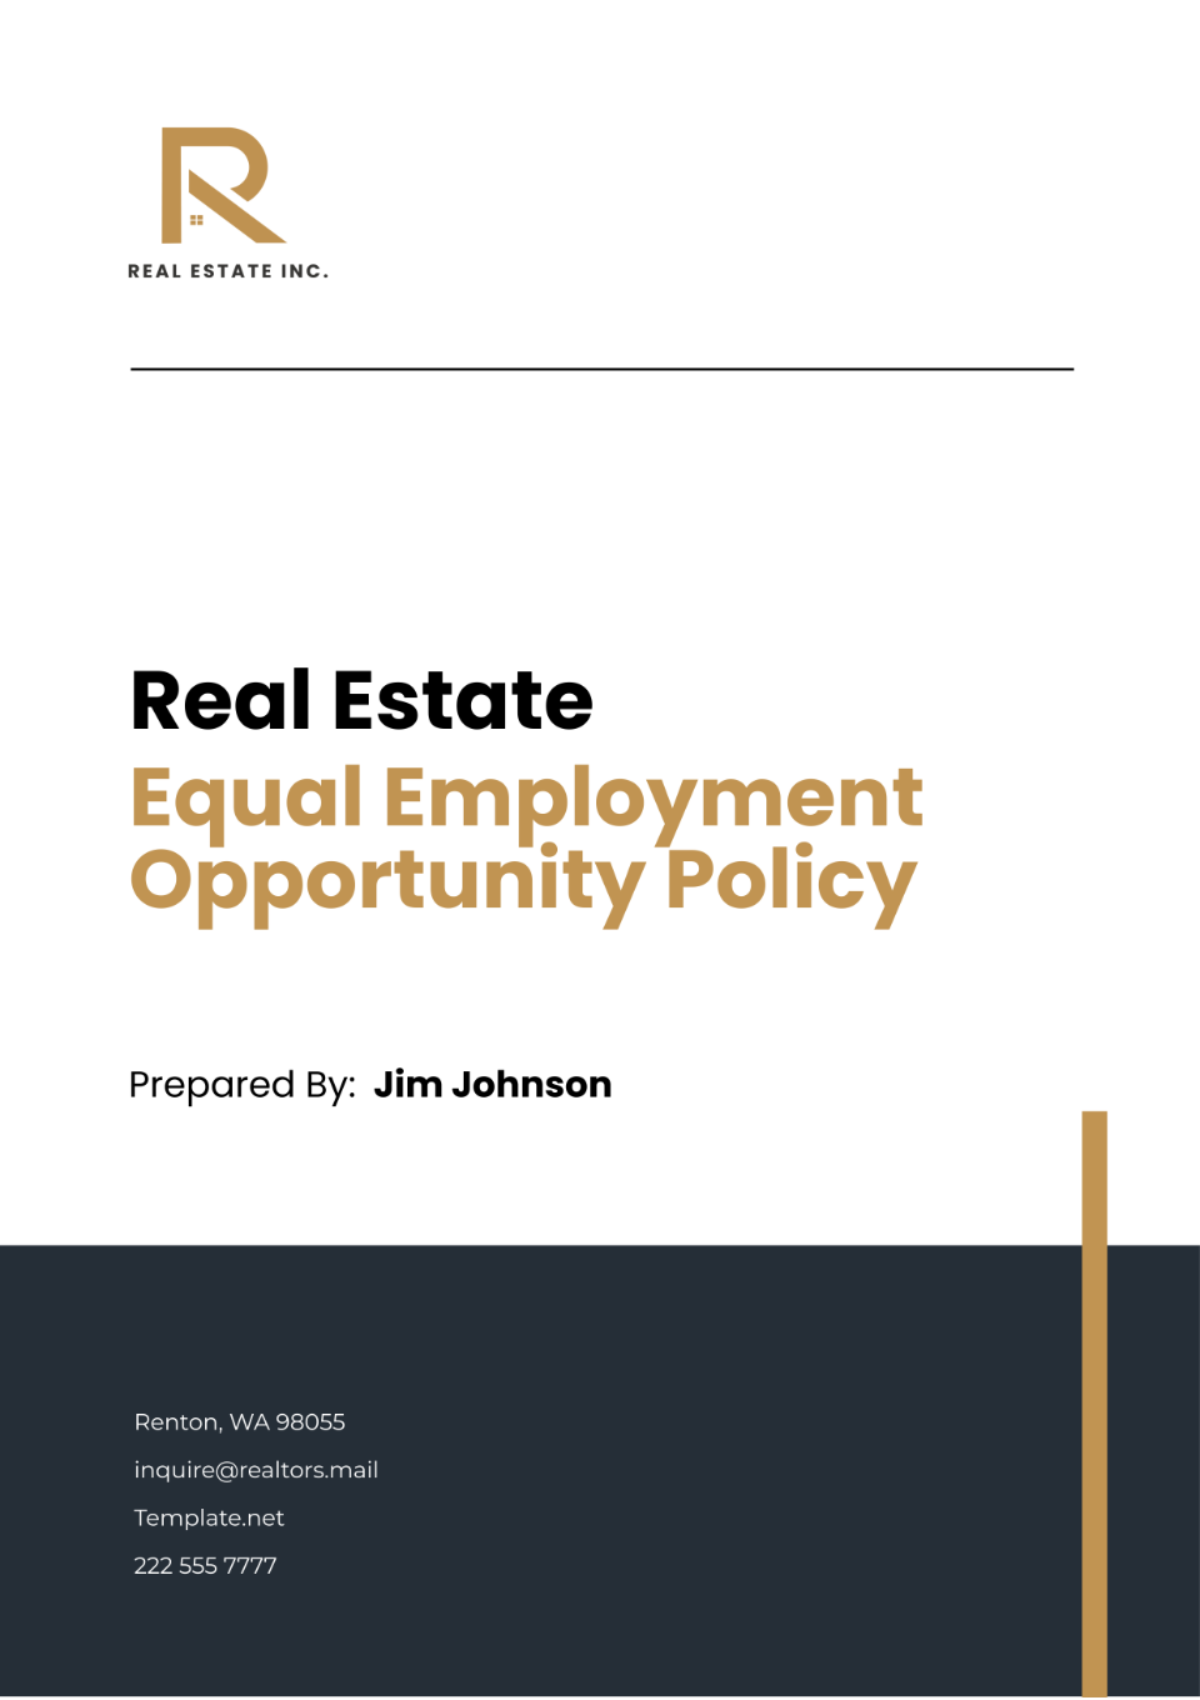 Real Estate Equal Employment Opportunity Policy Template